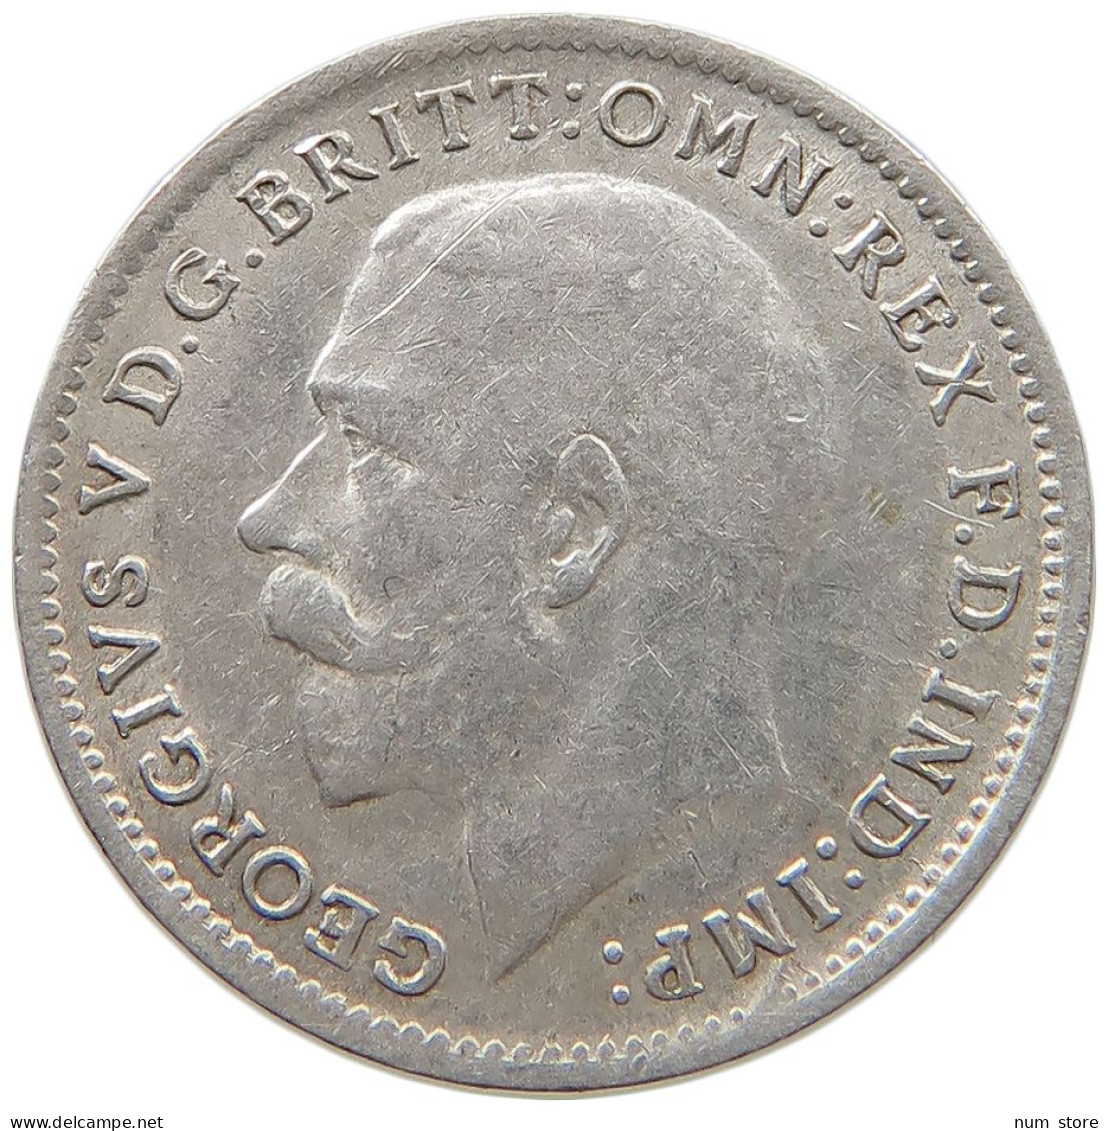 GREAT BRITAIN THREEPENCE 1920 George V. (1910-1936) #s059 0507 - F. 3 Pence